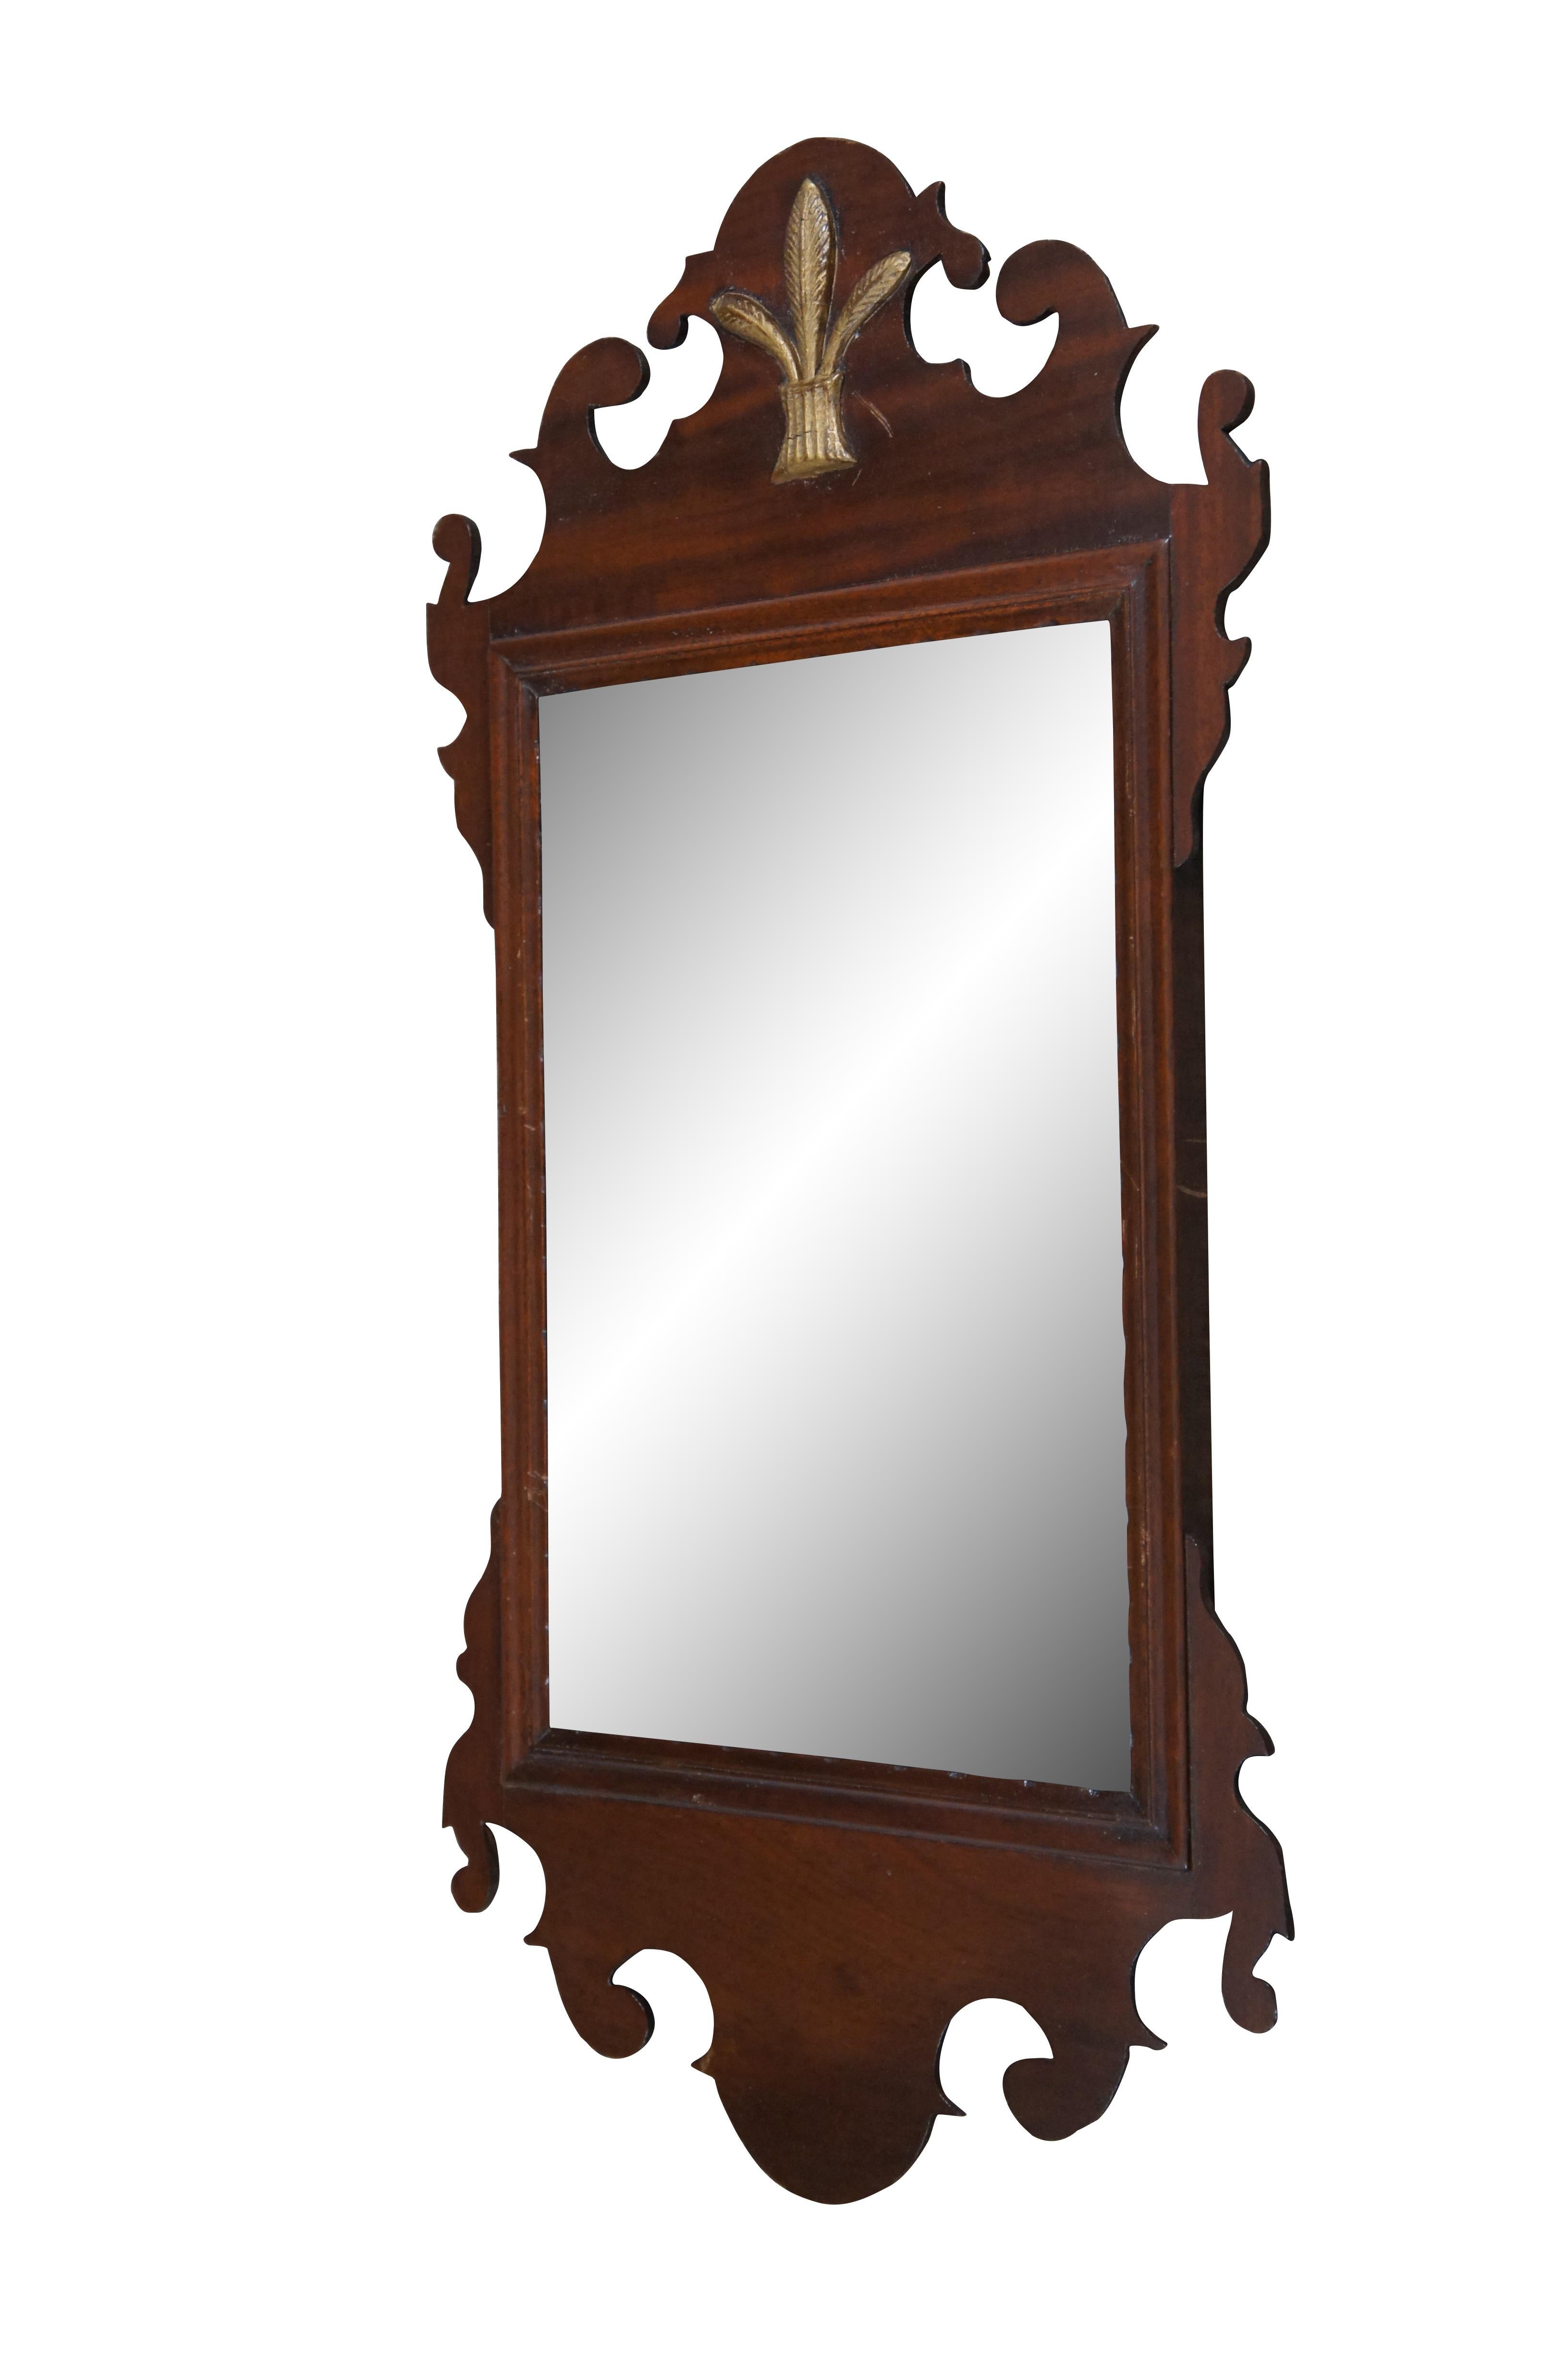 Antique mahogany Americna Federal style carved wall or vanity mirror with applied gilt plumage / trio of feathers accent.

Dimensions:
13